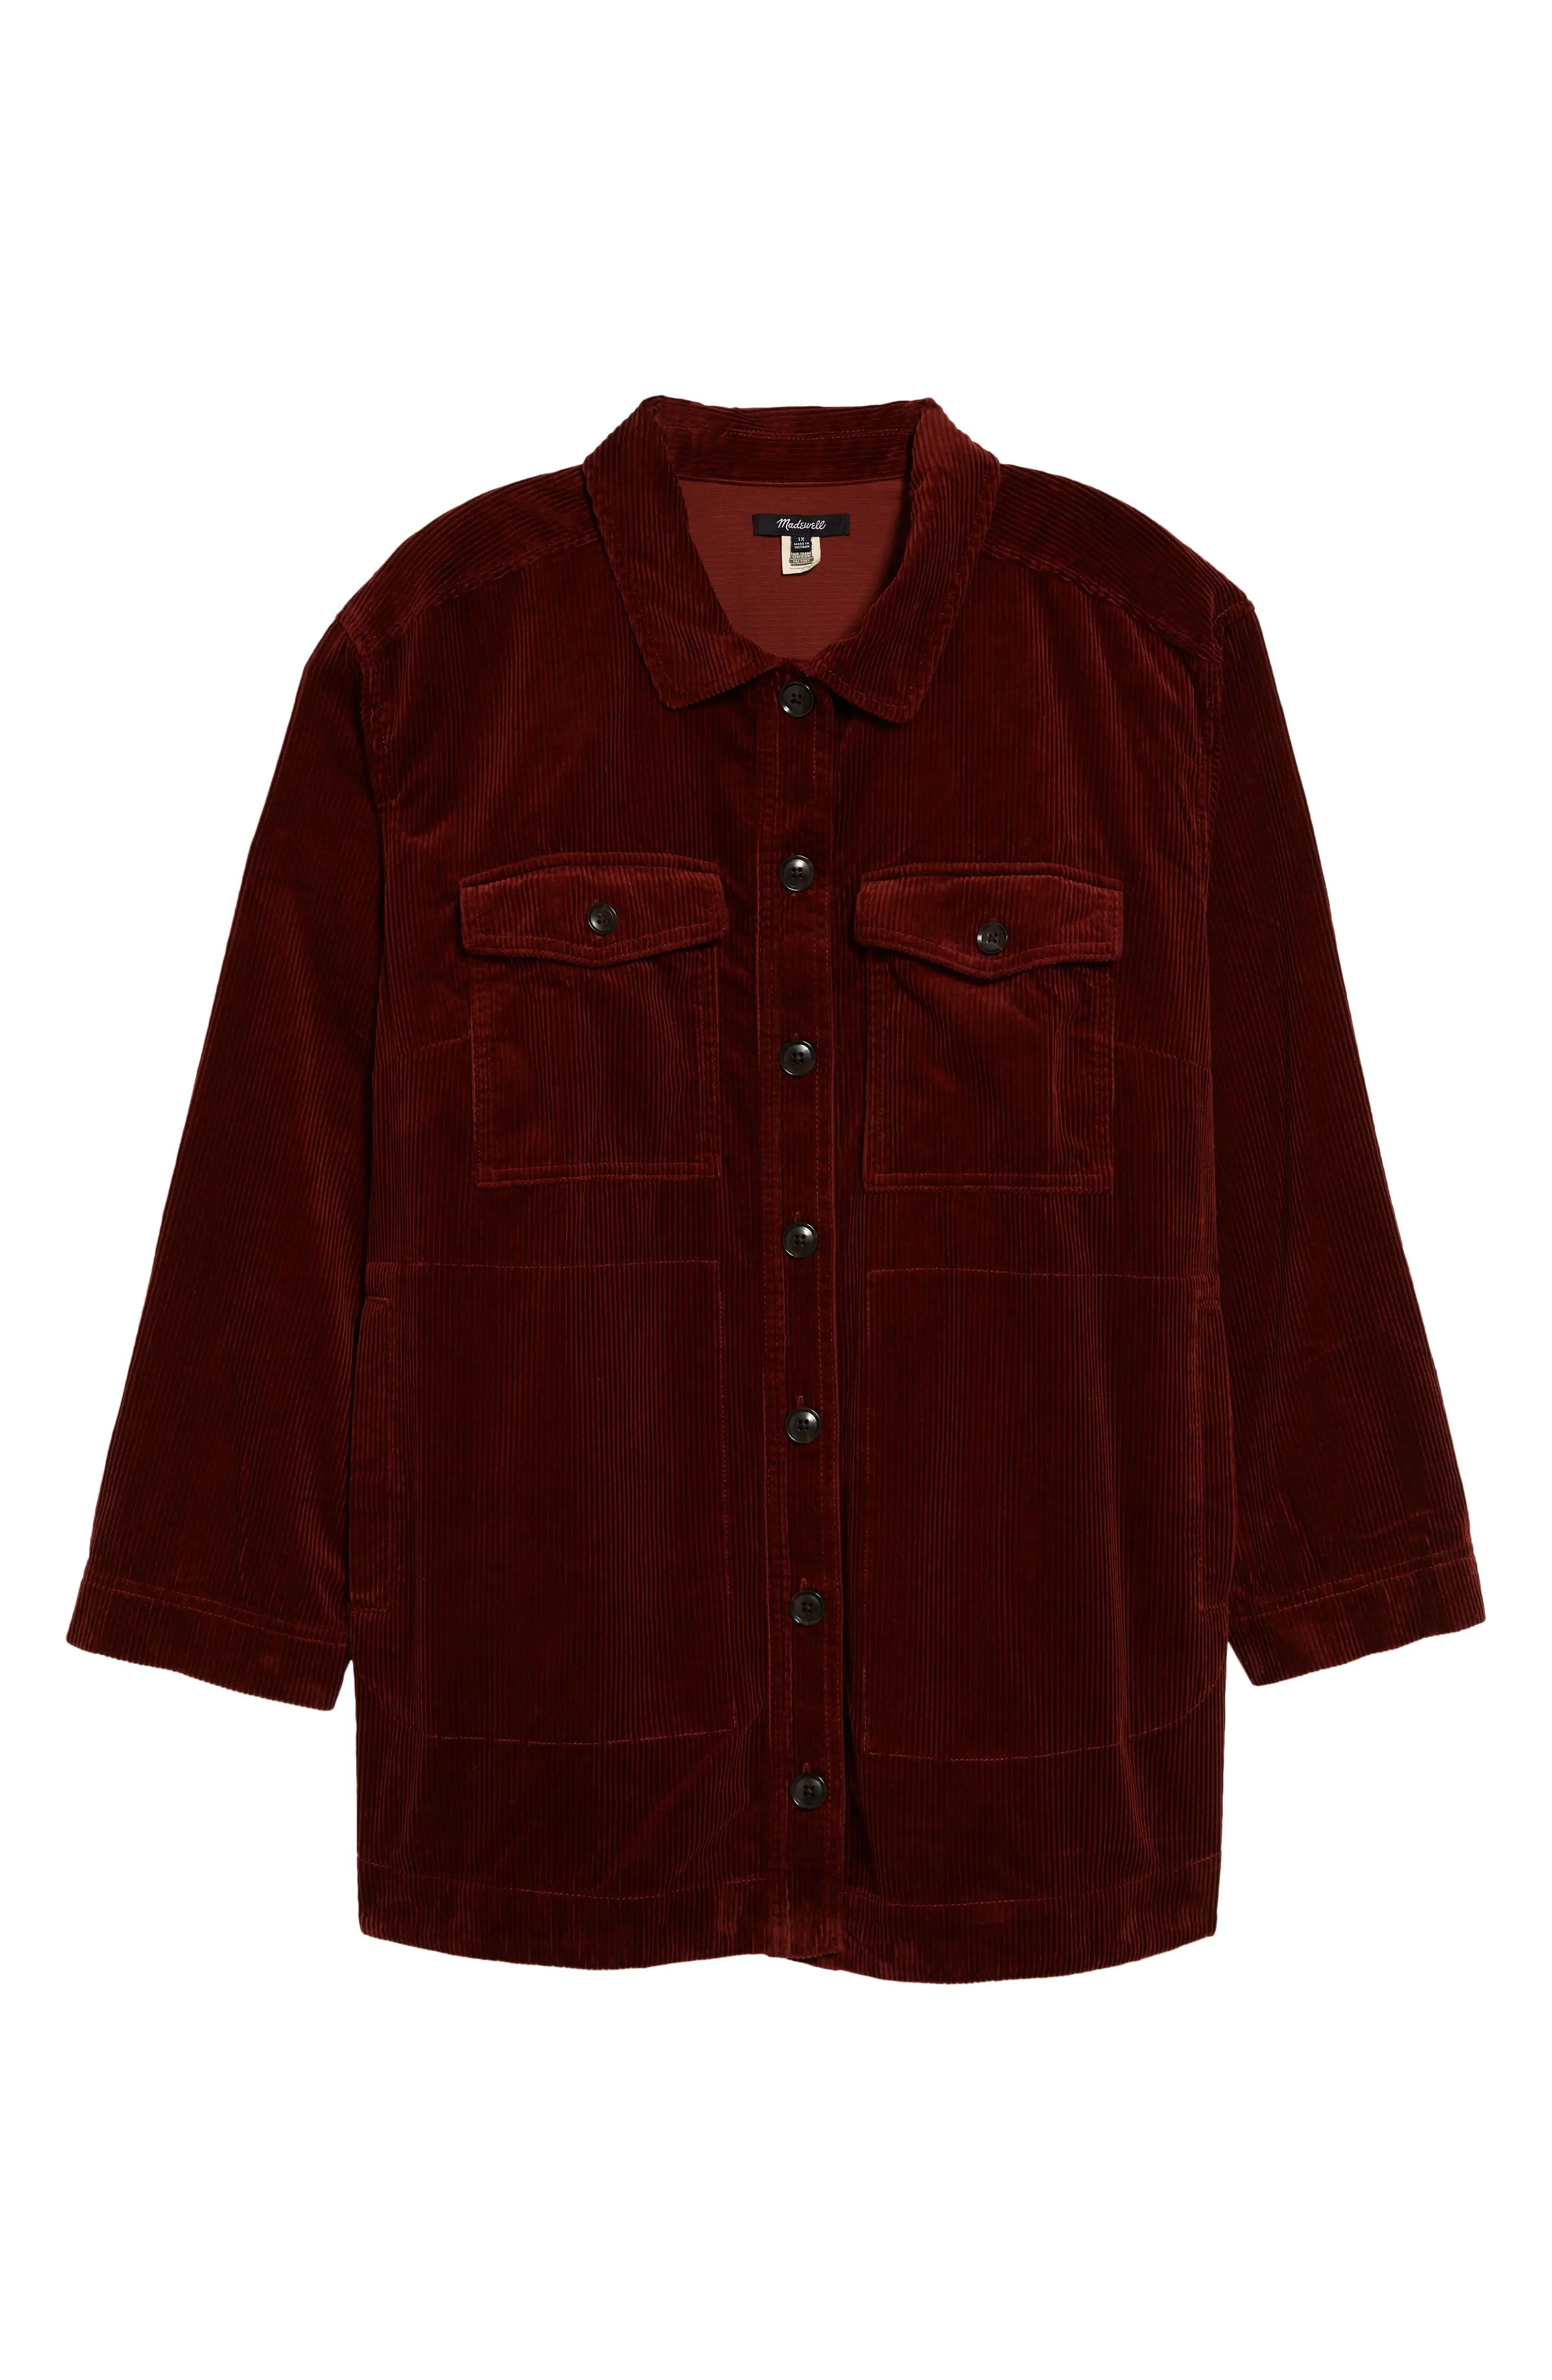 Madewell Yorkway Corduroy Shirt Jacket, Size 1X in Stained Mahogany at Nordstrom | Nordstrom